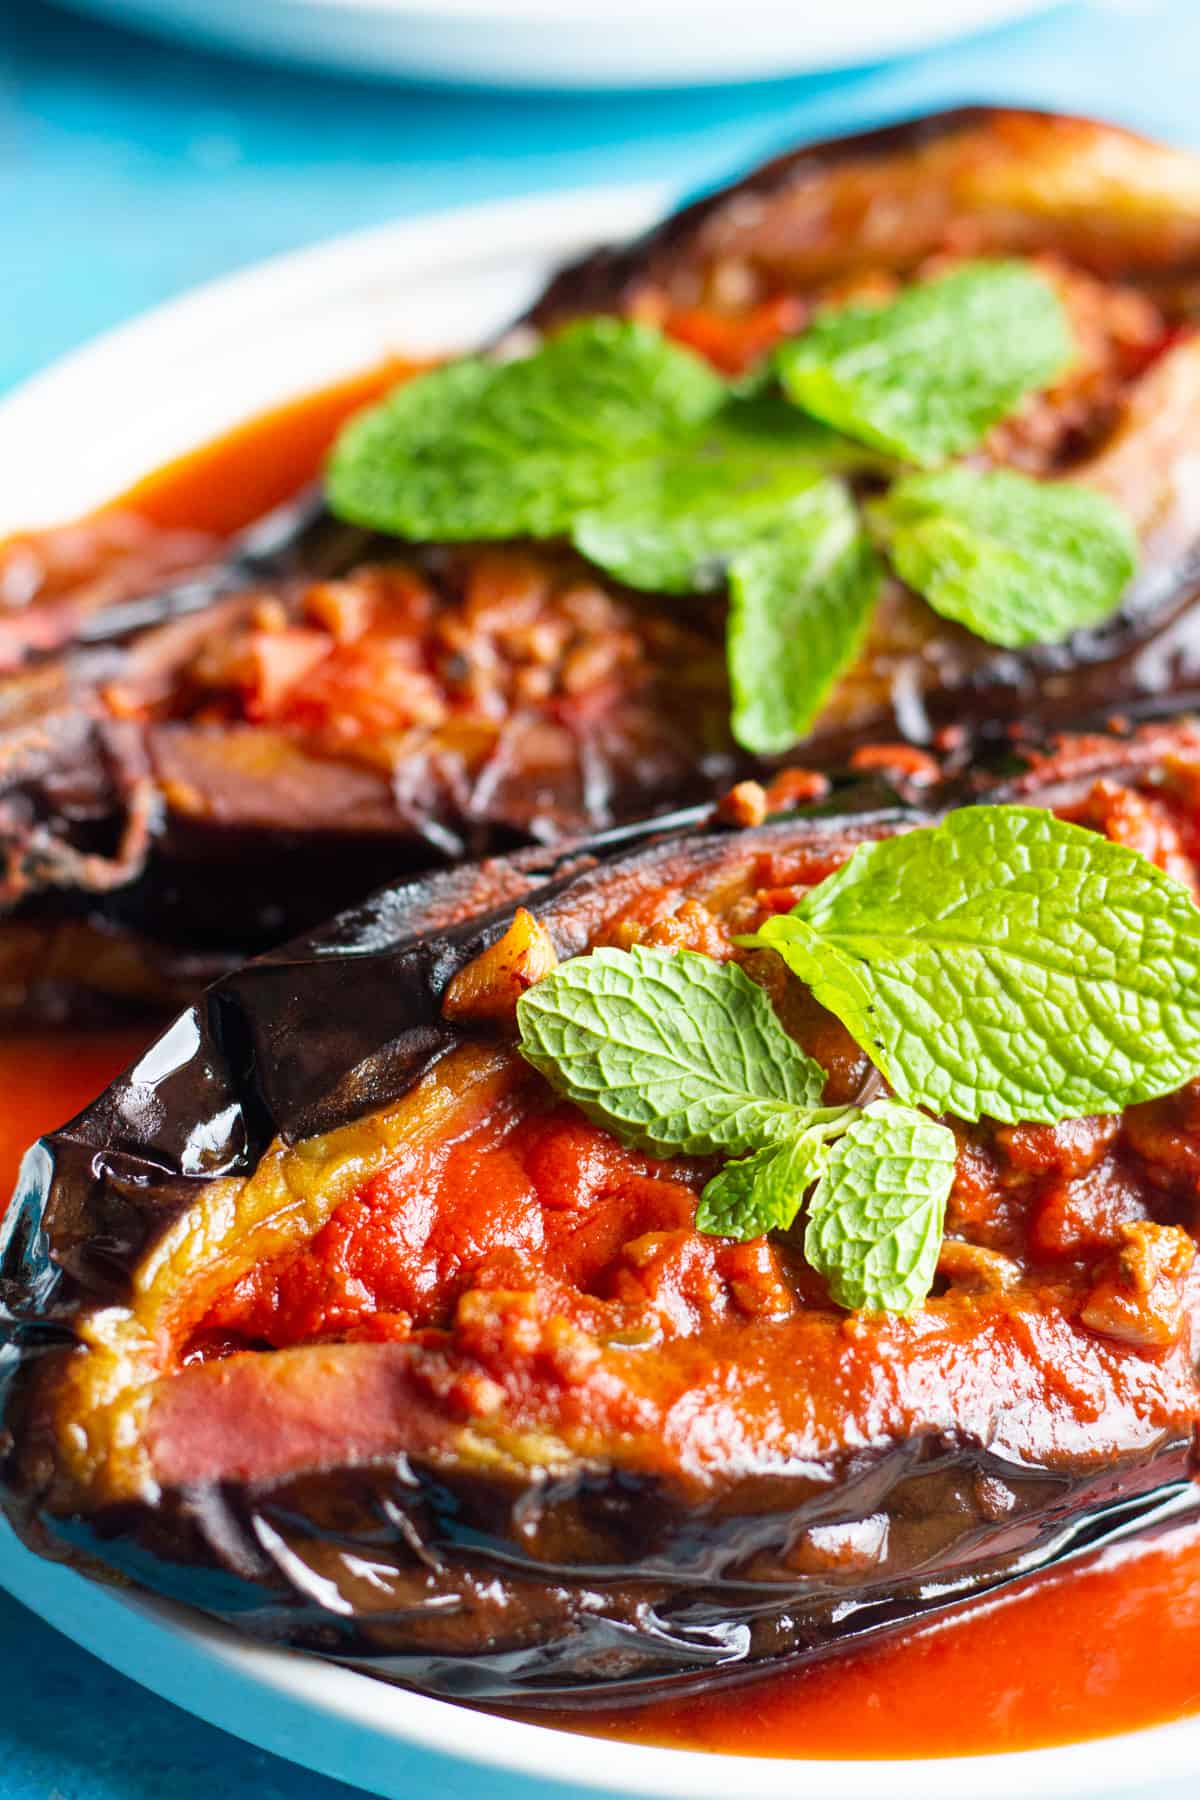 Karniyarik is a classic Turkish stuffed eggplant recipe. Delicious eggplants are stuffed with a tasty ground beef, pepper and tomatoes filling and are baked to perfection. 
